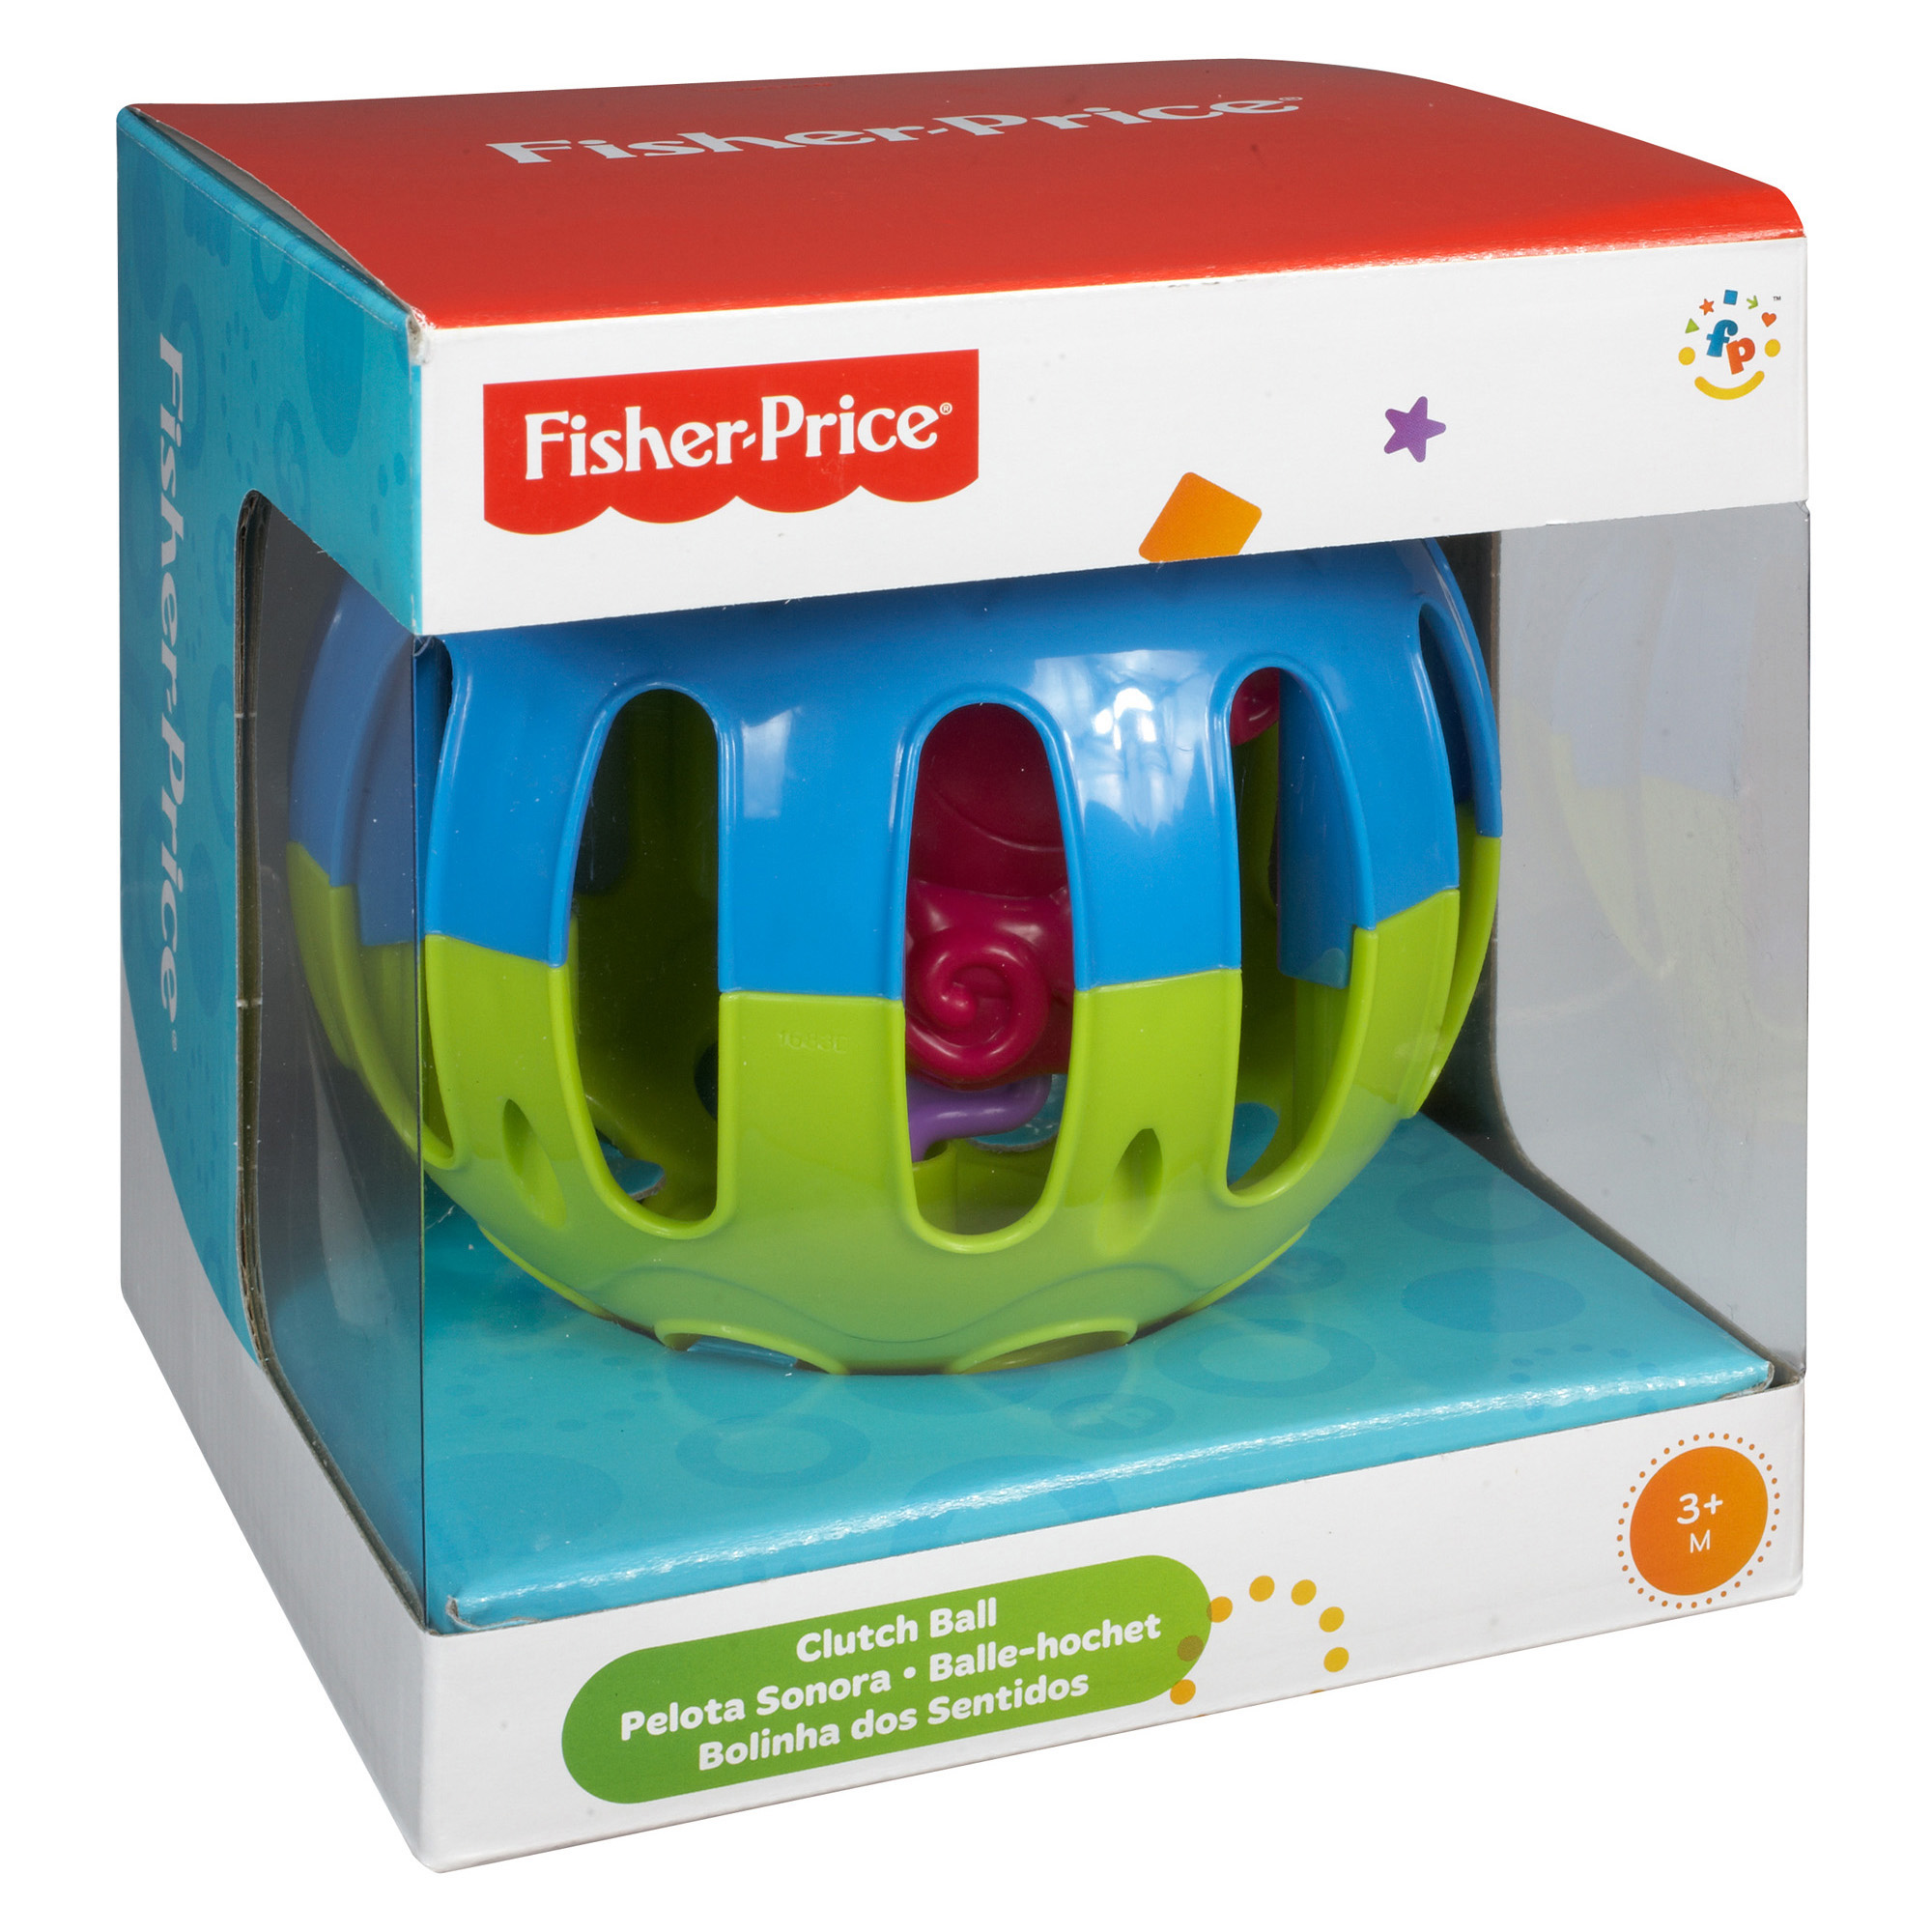 Fisher-Price Growing Baby Clutch Ball - image 2 of 2